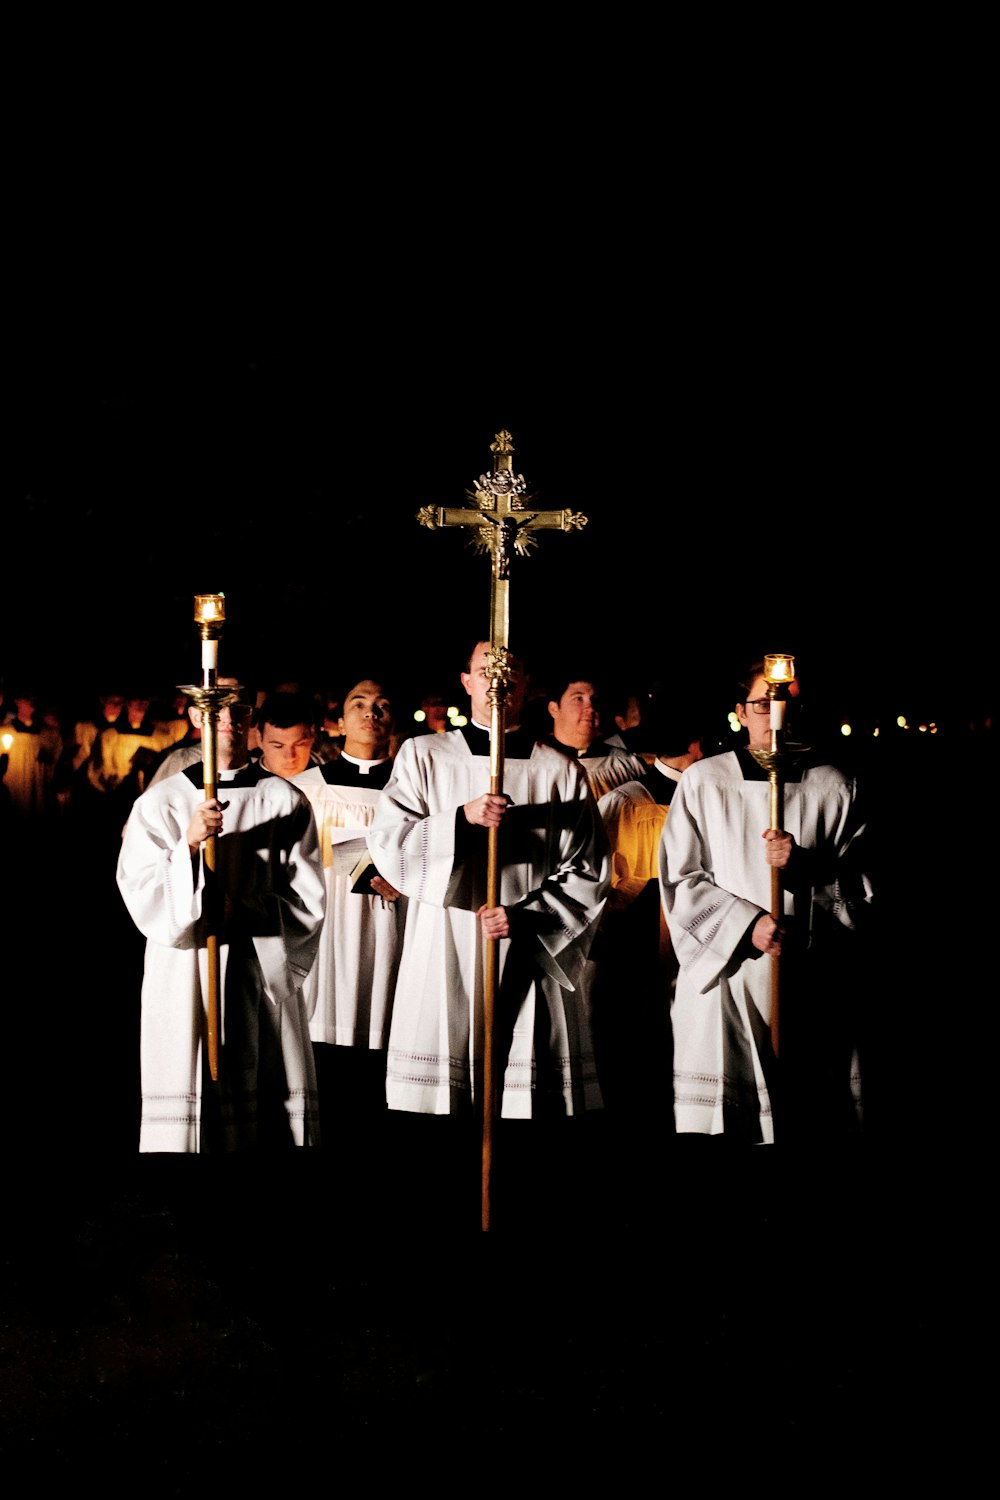 men holding cross and candle light